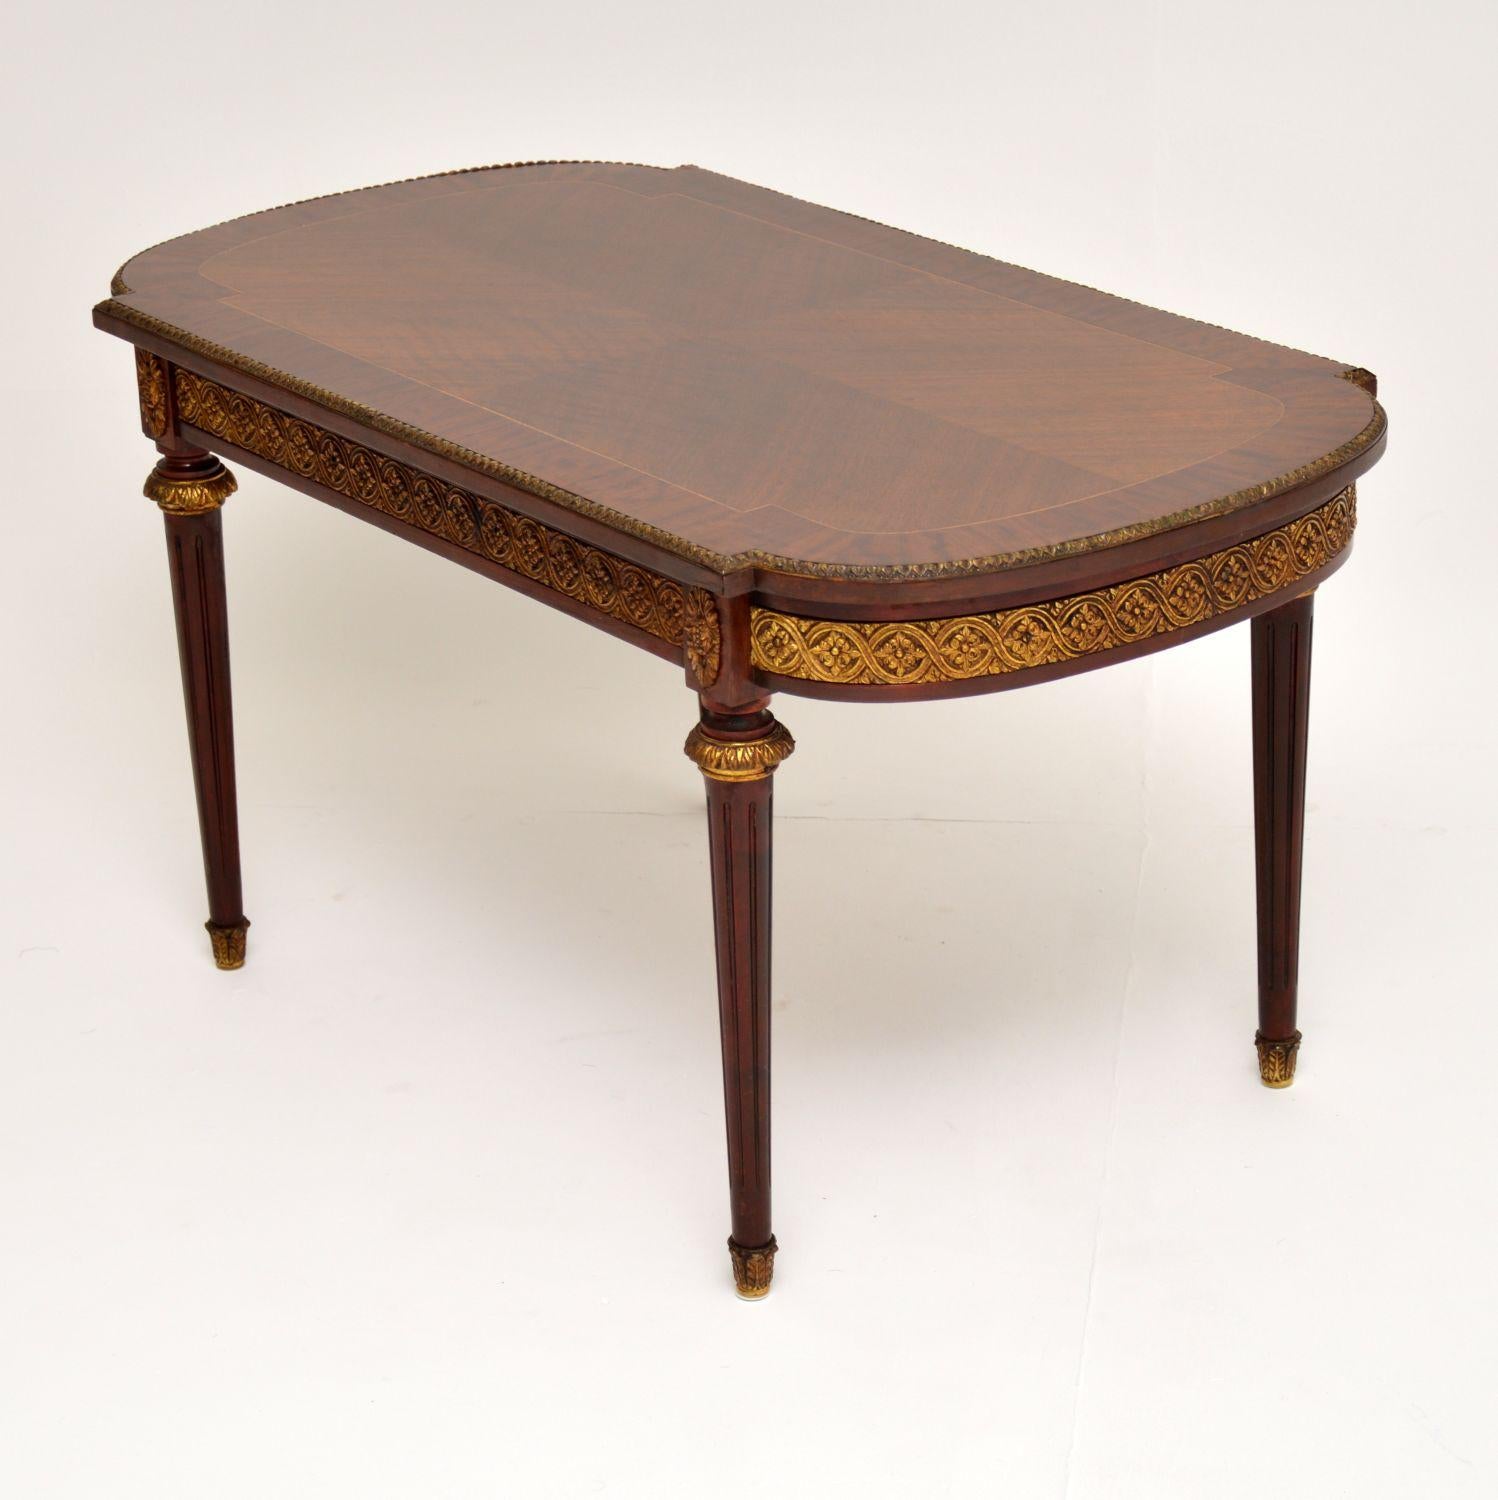 Kingwood Antique French Inlaid King Wood Coffee Table